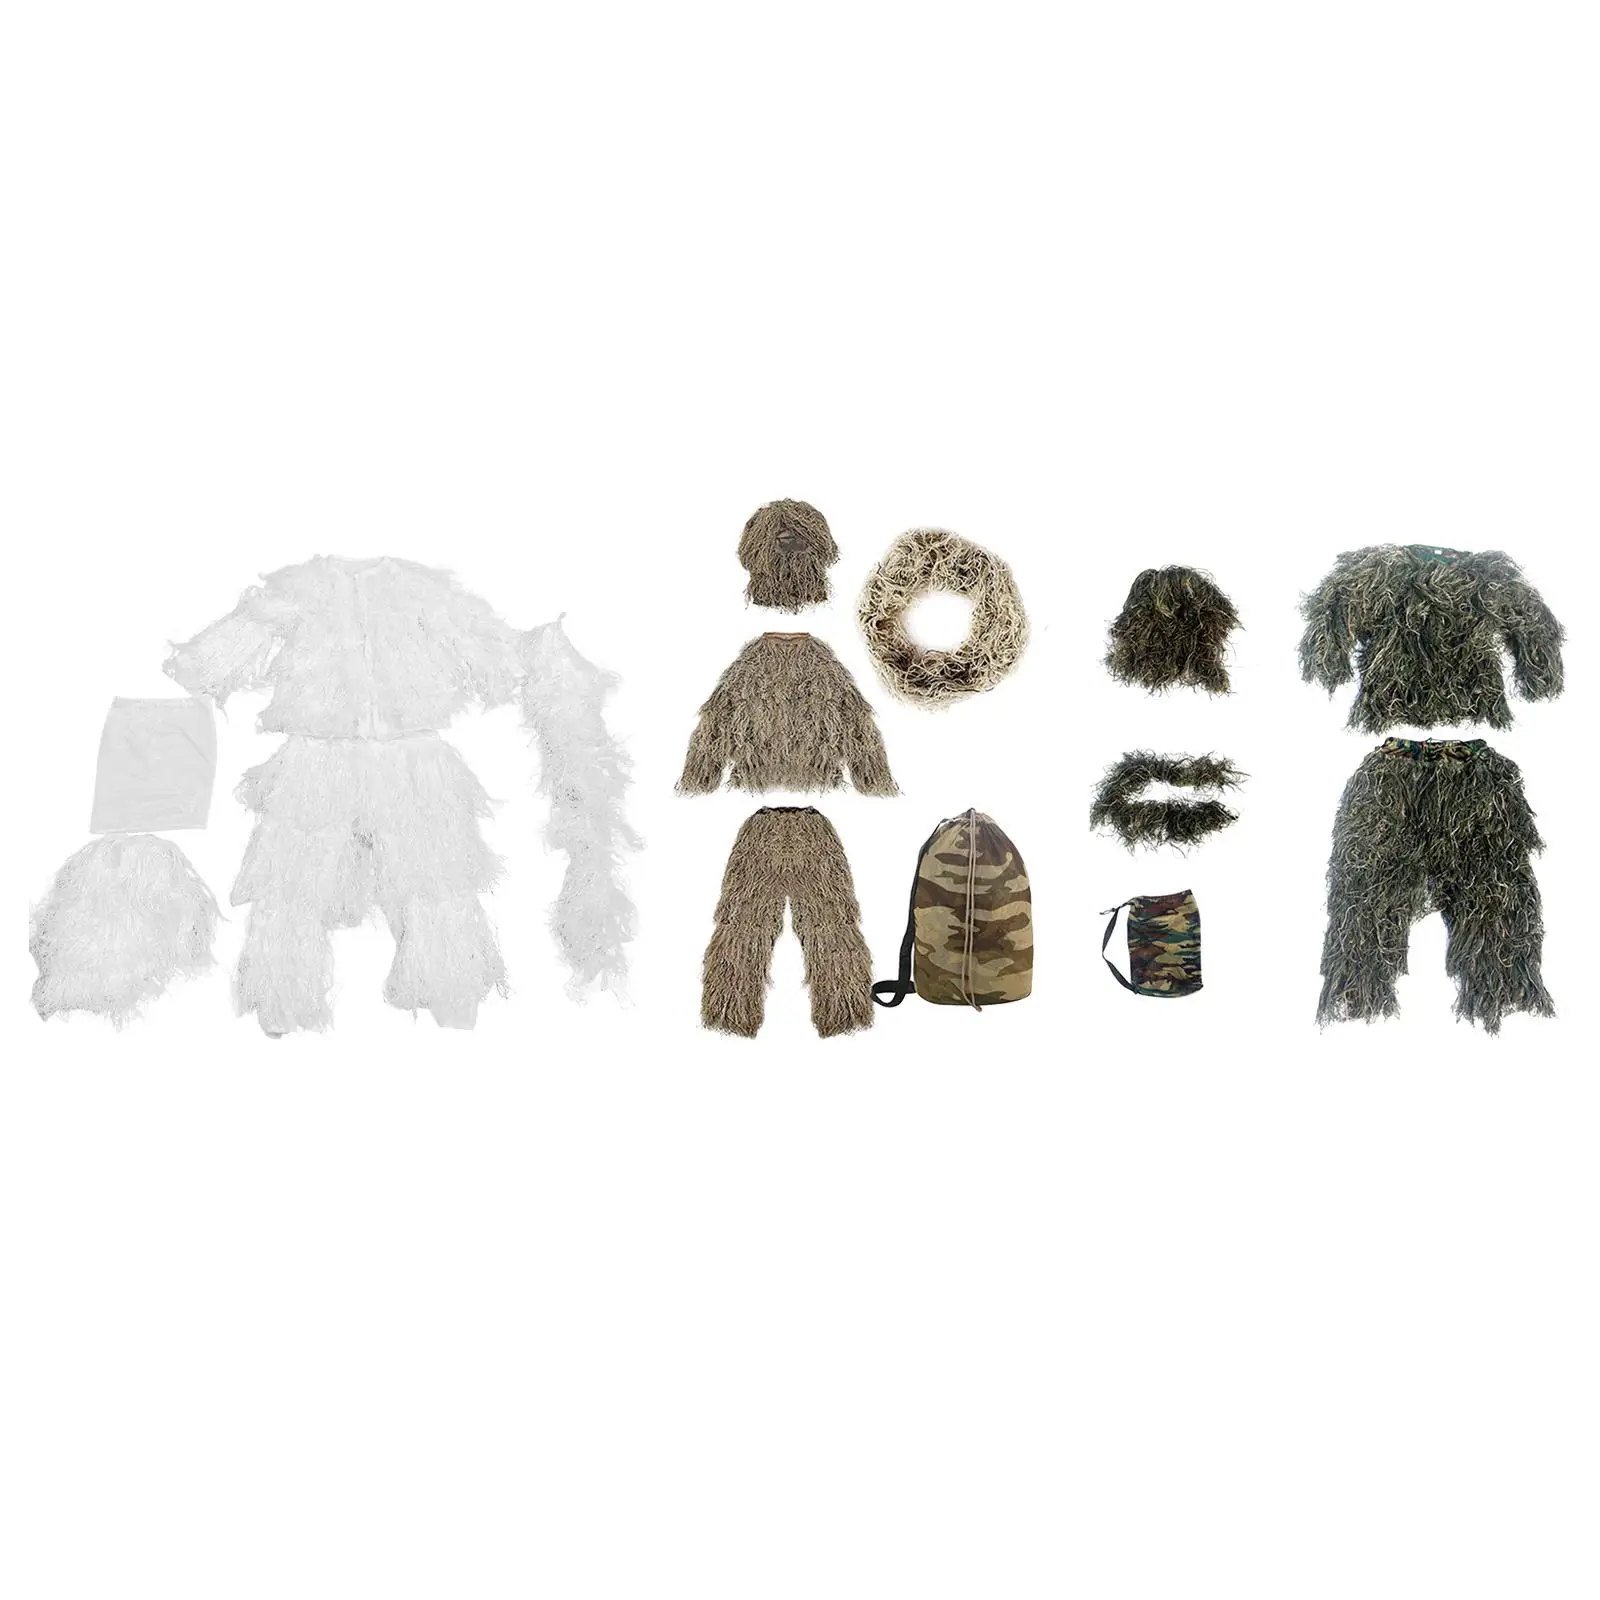 Ghillie Suit Woodland Breathable Disguise Uniform Set with Storage Bag for Game Birdwatching Turkey Hunting Costume Gardening